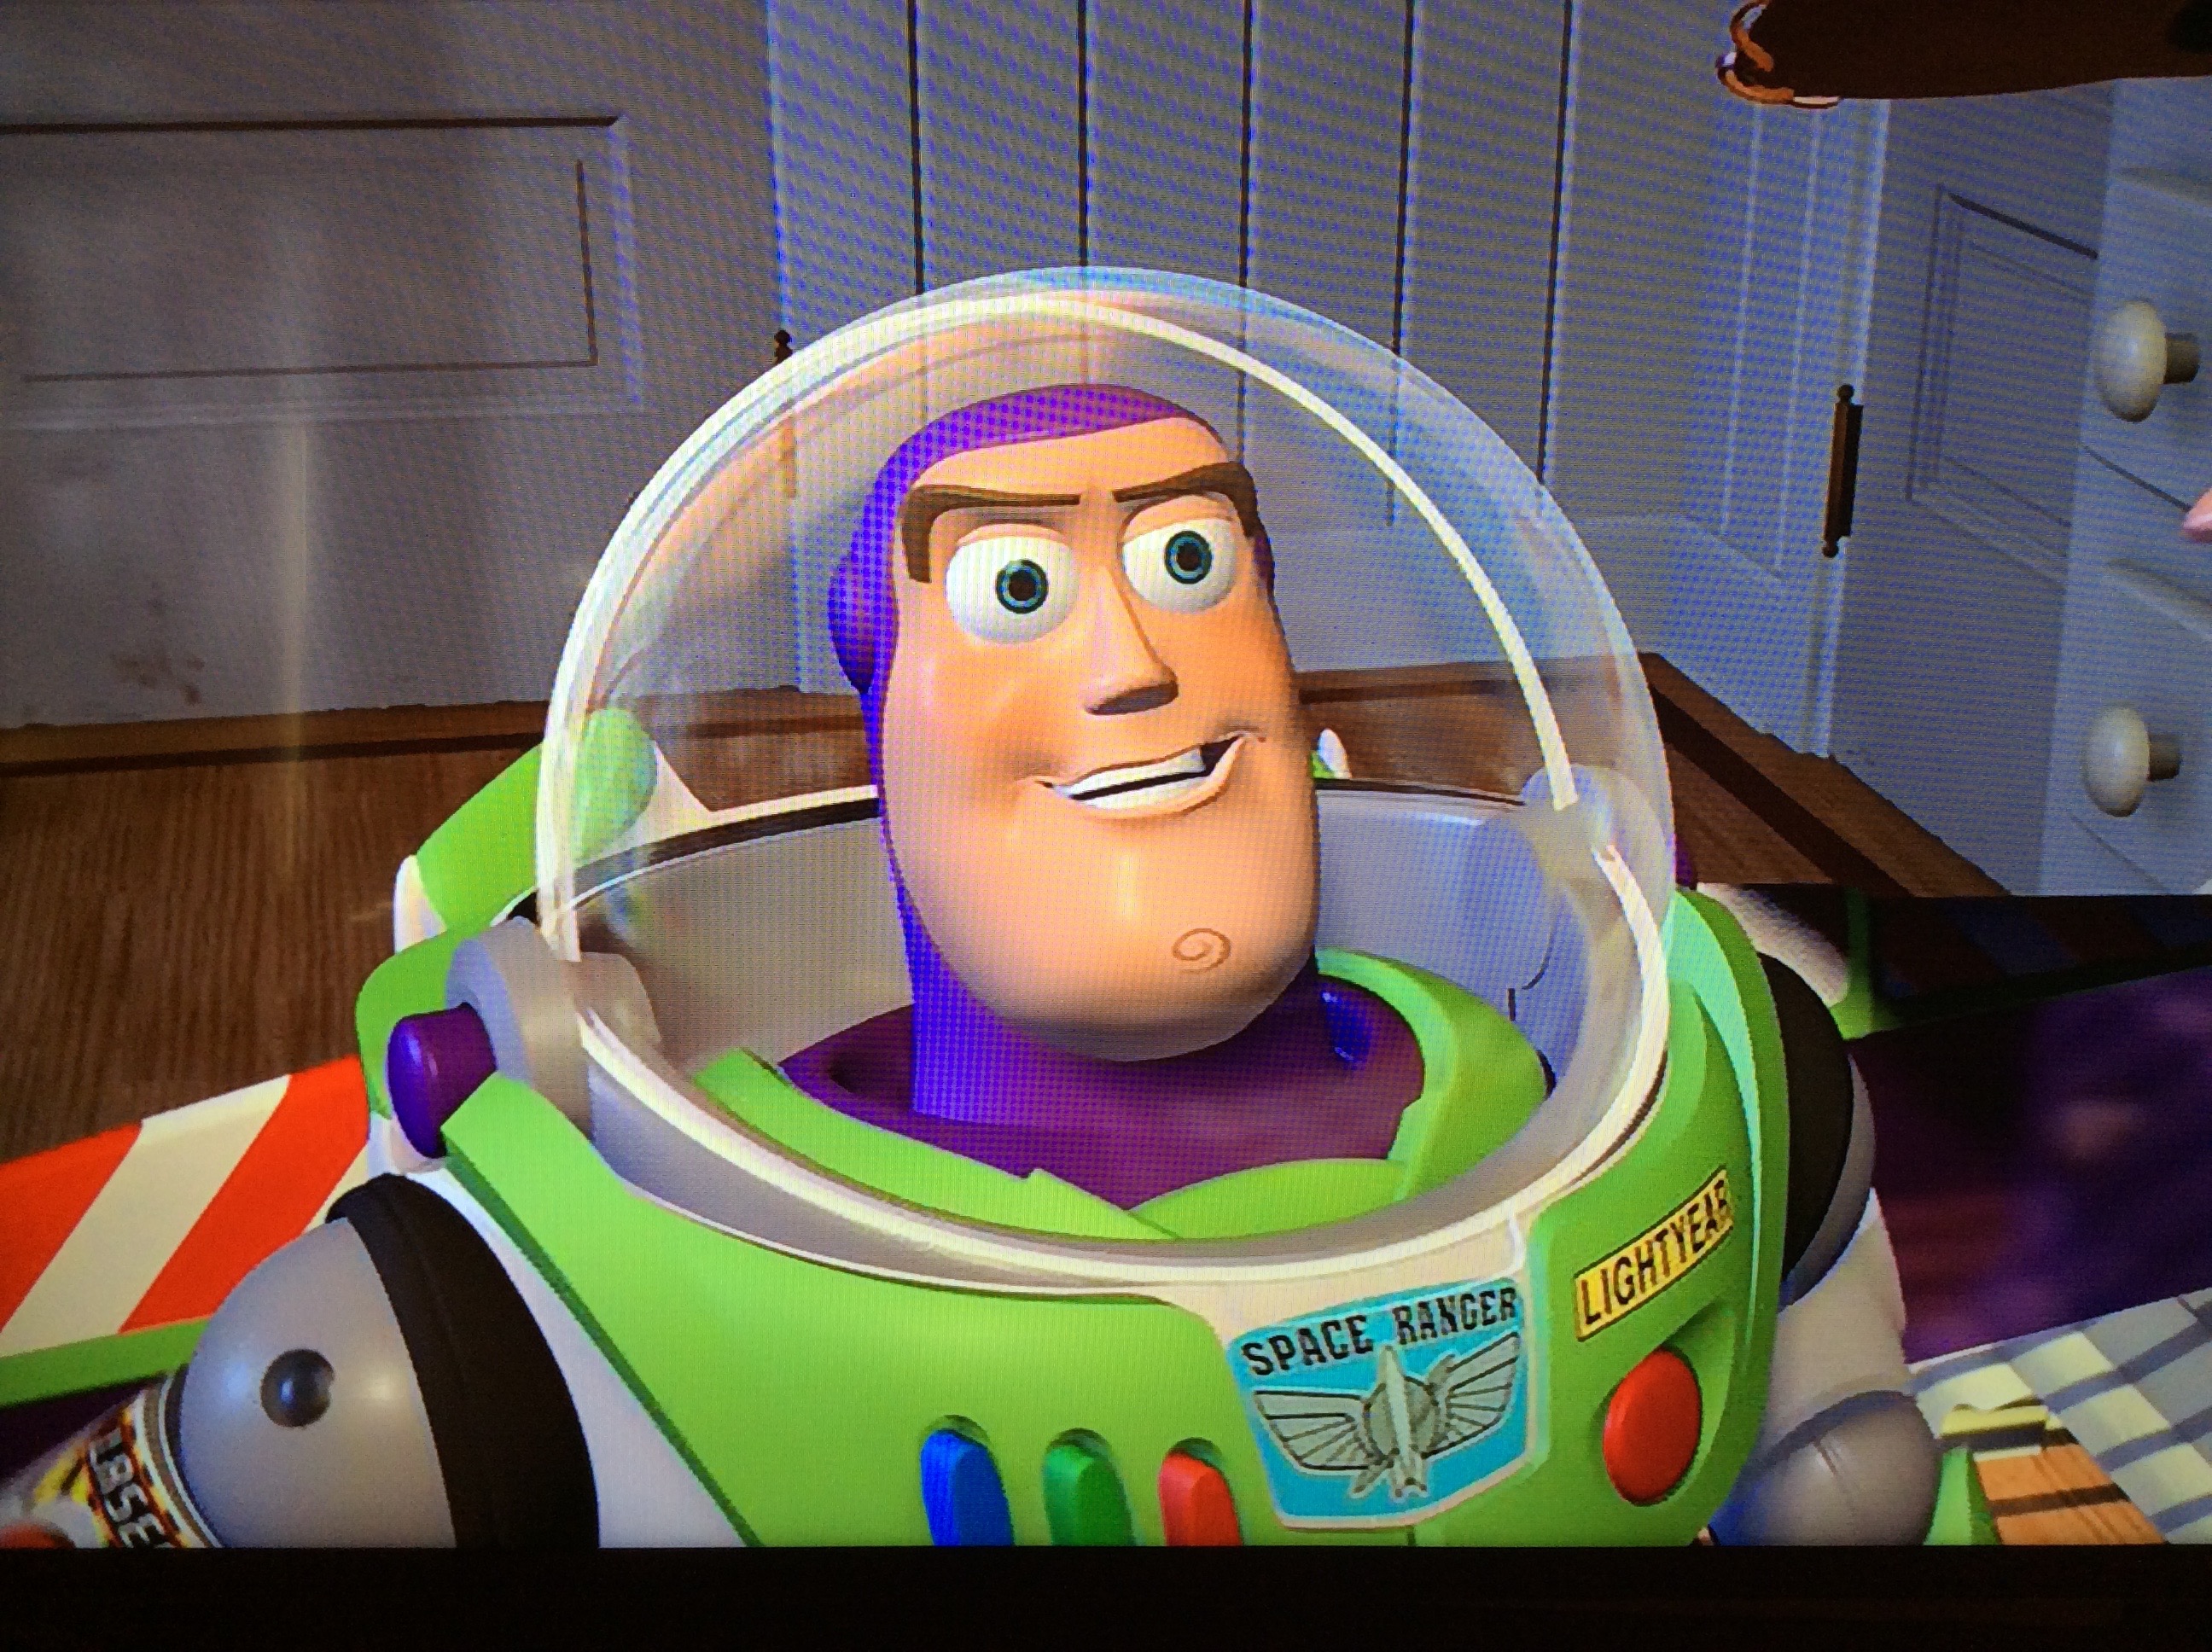 Buzz_Lightyear_out_of_the_box.jpg